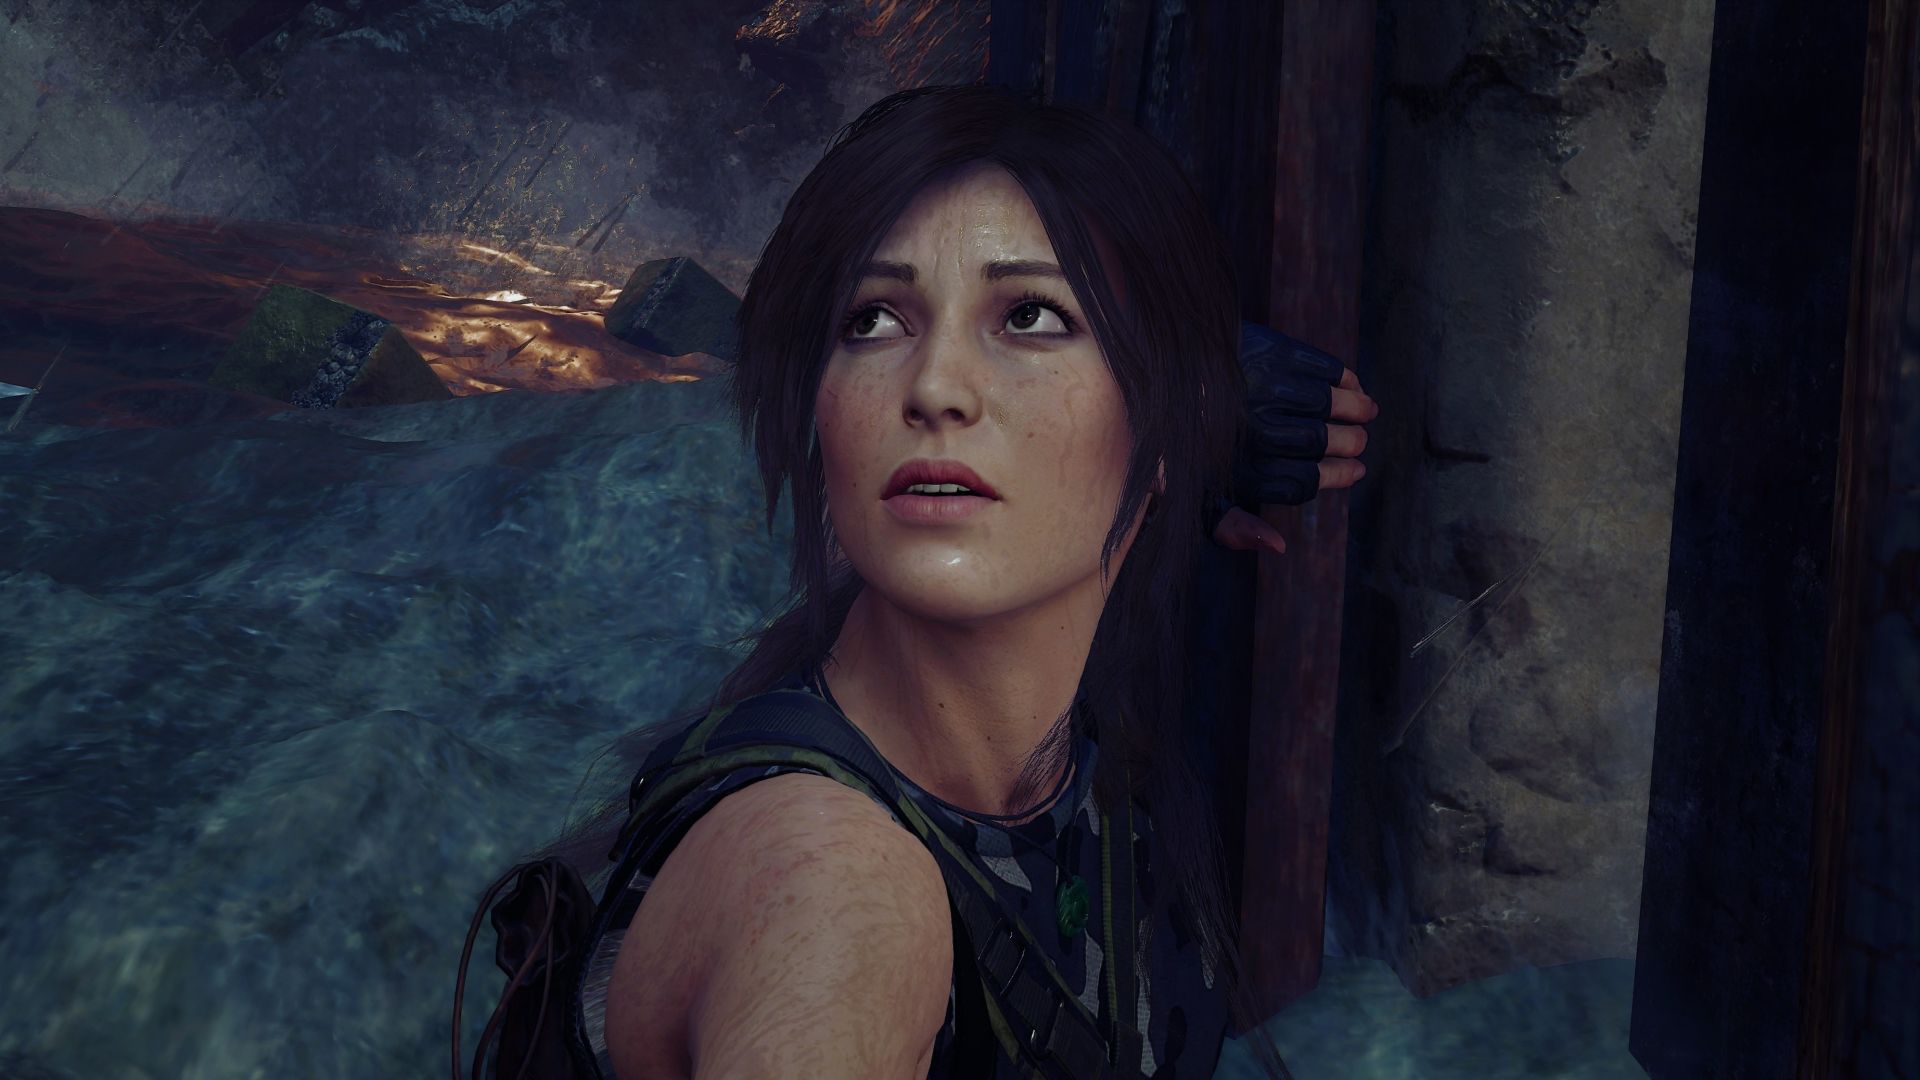 Shadow of the tomb raider, video game, lara croft, 2018 wallpaper, HD image, picture, background, de42f4